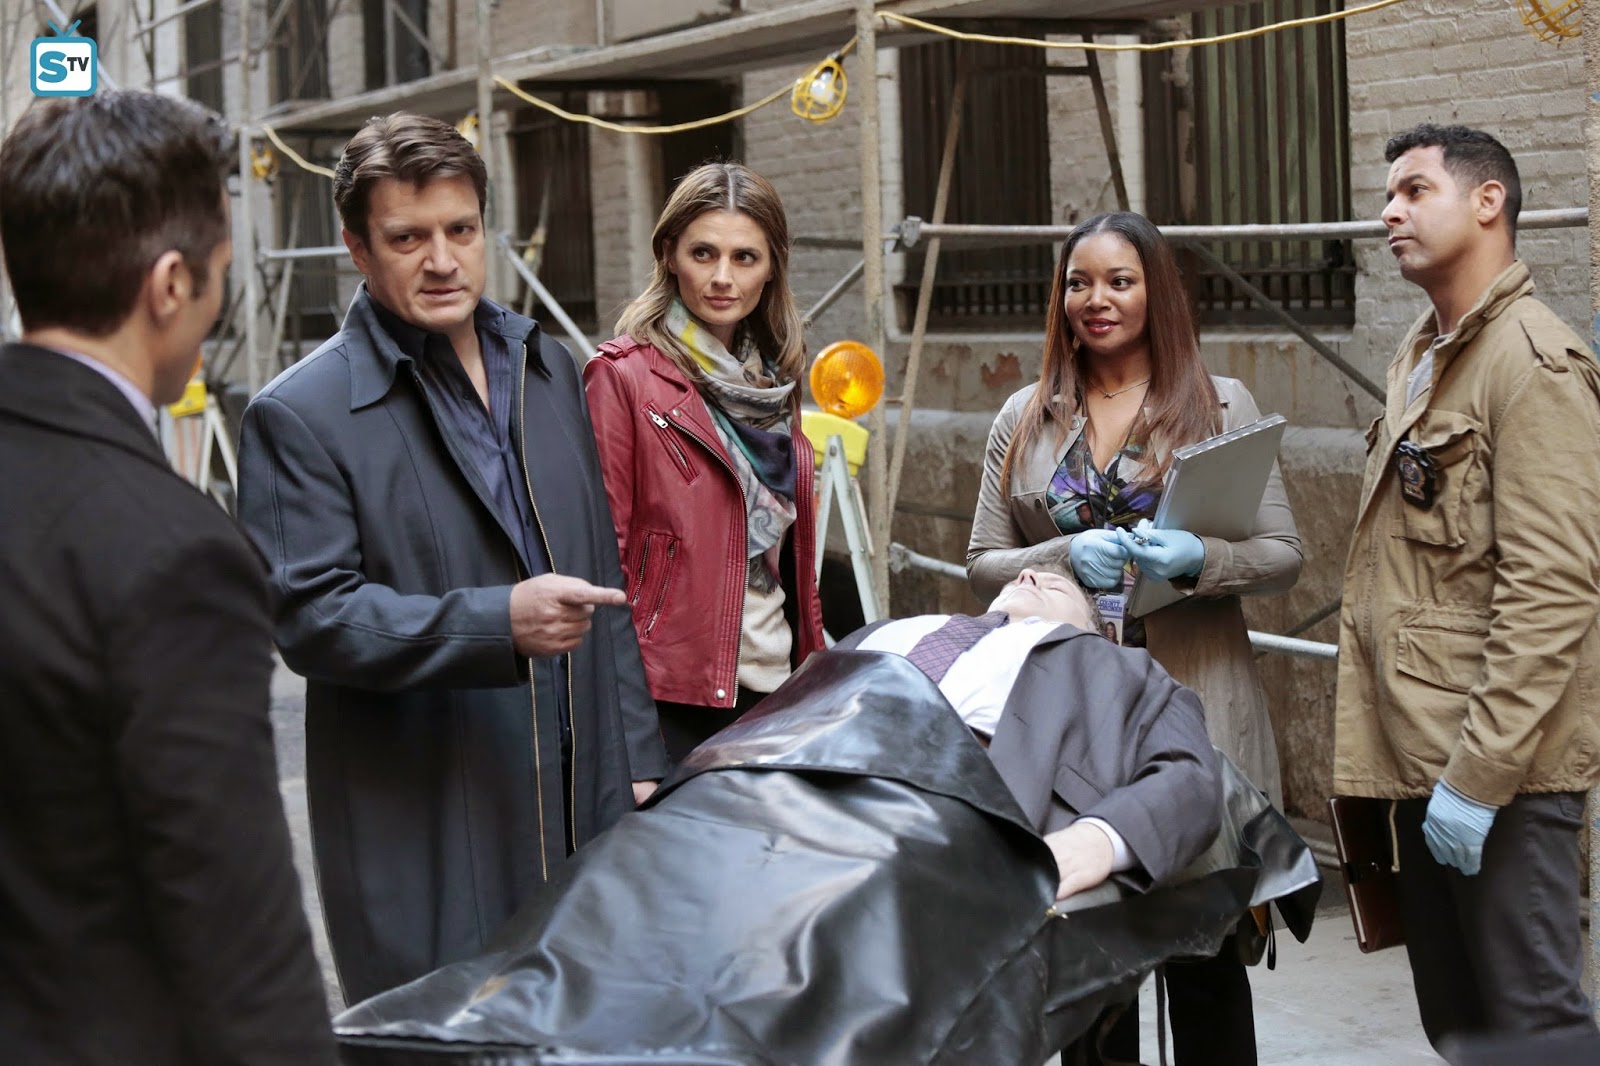 POLL: What was the best scene in Castle - Habeas Corpse?